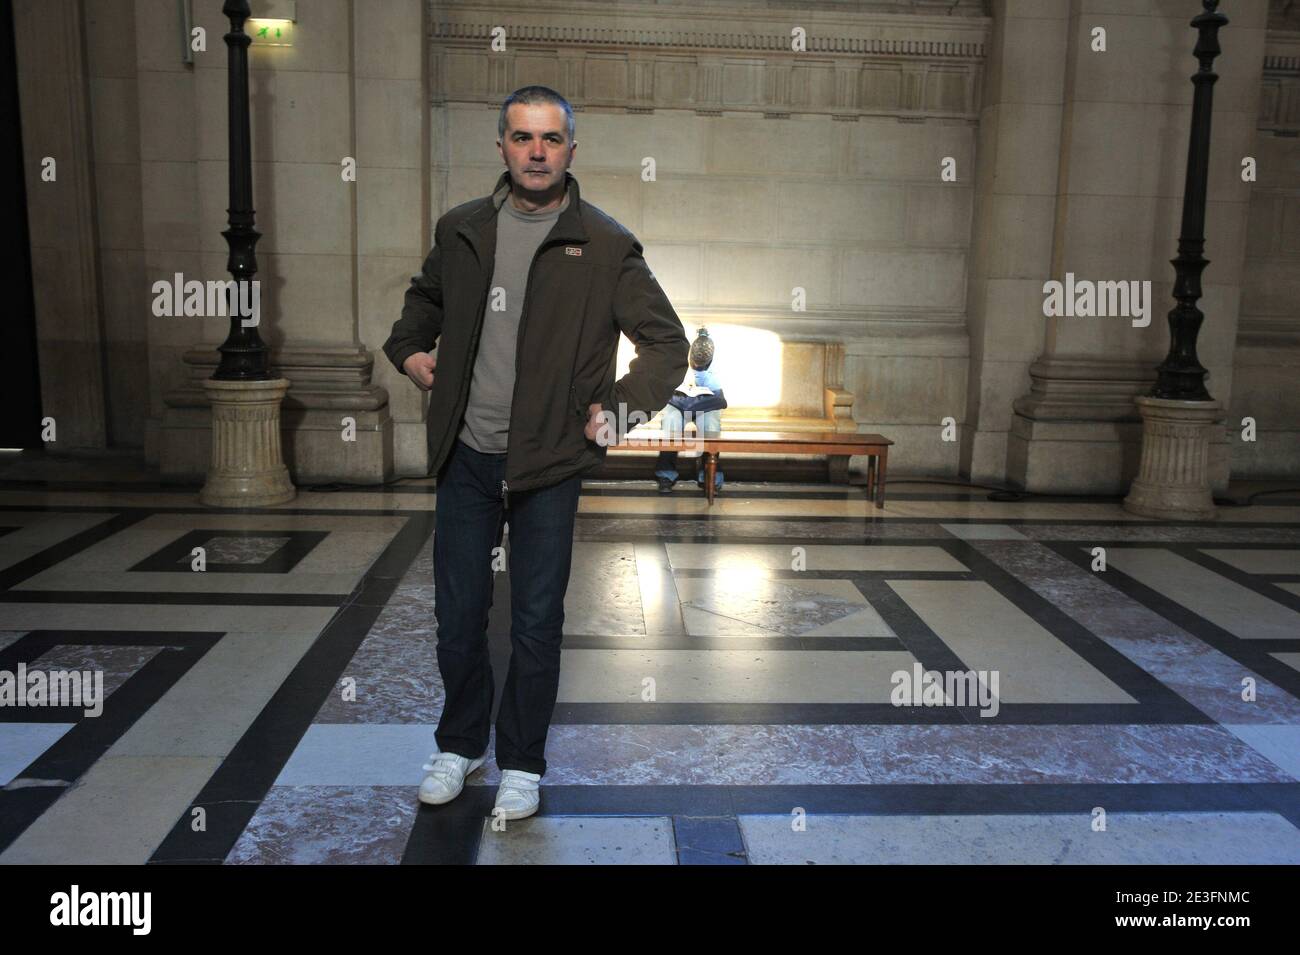 Stephane Colonna, brother of Yvan Colonna, arrives to the Paris courthouse to attend the Yvan Colonna Trial, in Paris, France, on March 16, 2009. Photo by Mousse/ABACAPRESS.COM Stock Photo